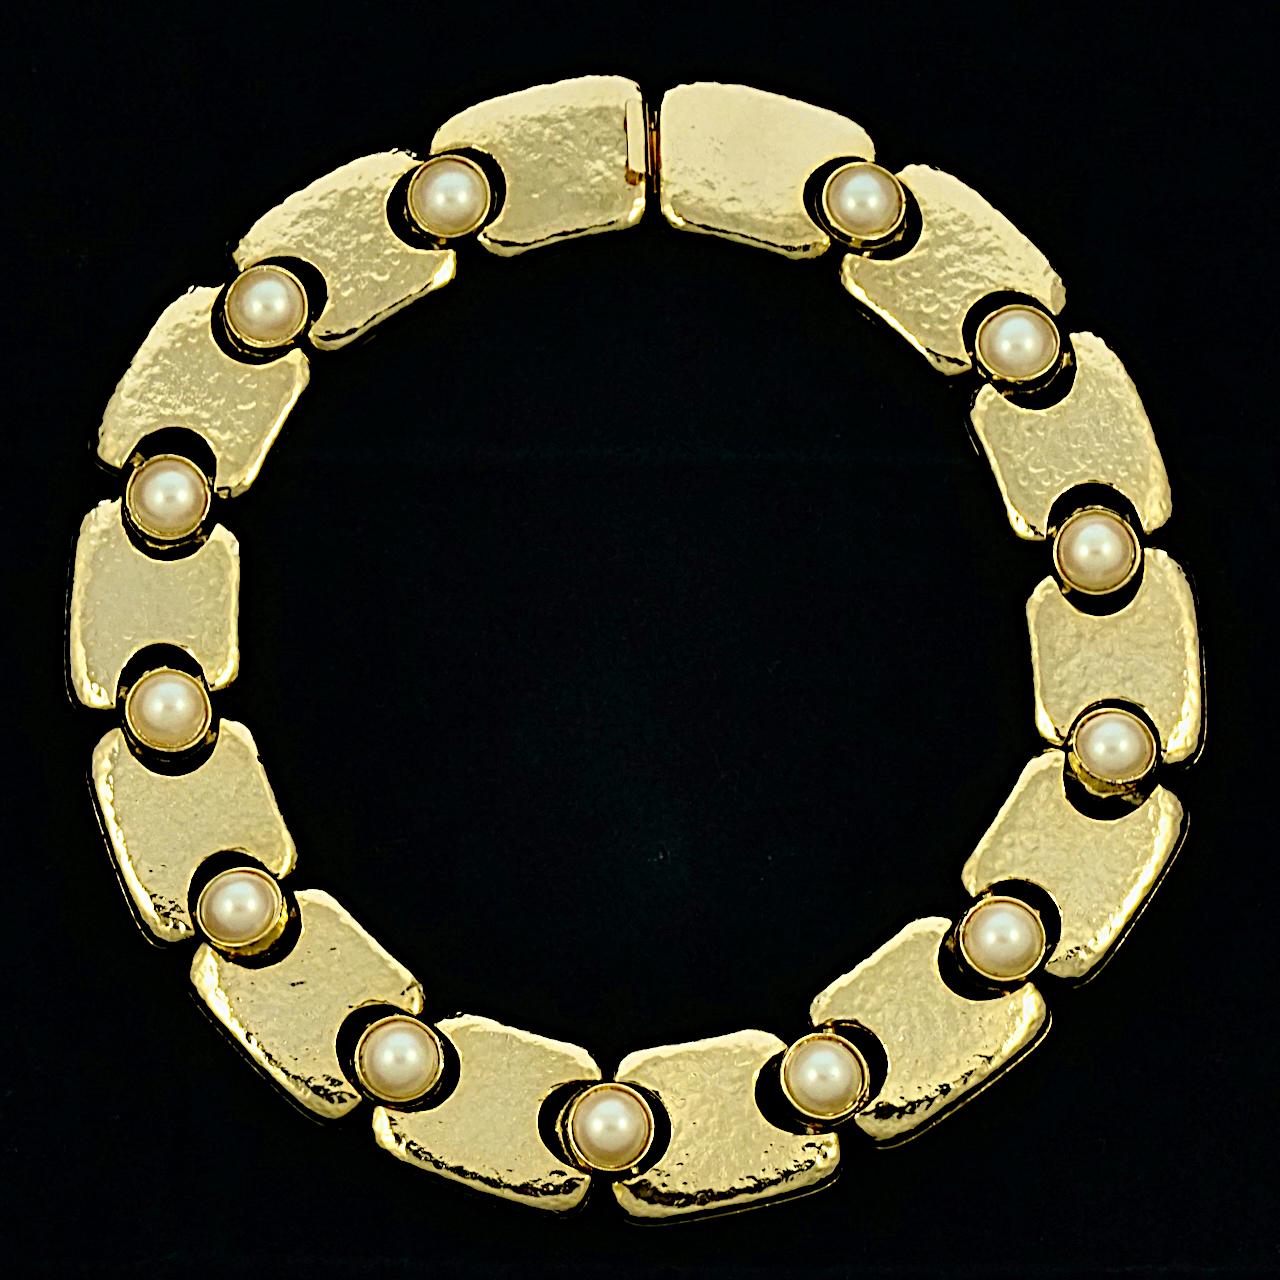 Gold Plated Textured Link Collar Necklace with Faux Pearls circa 1980s For Sale 4